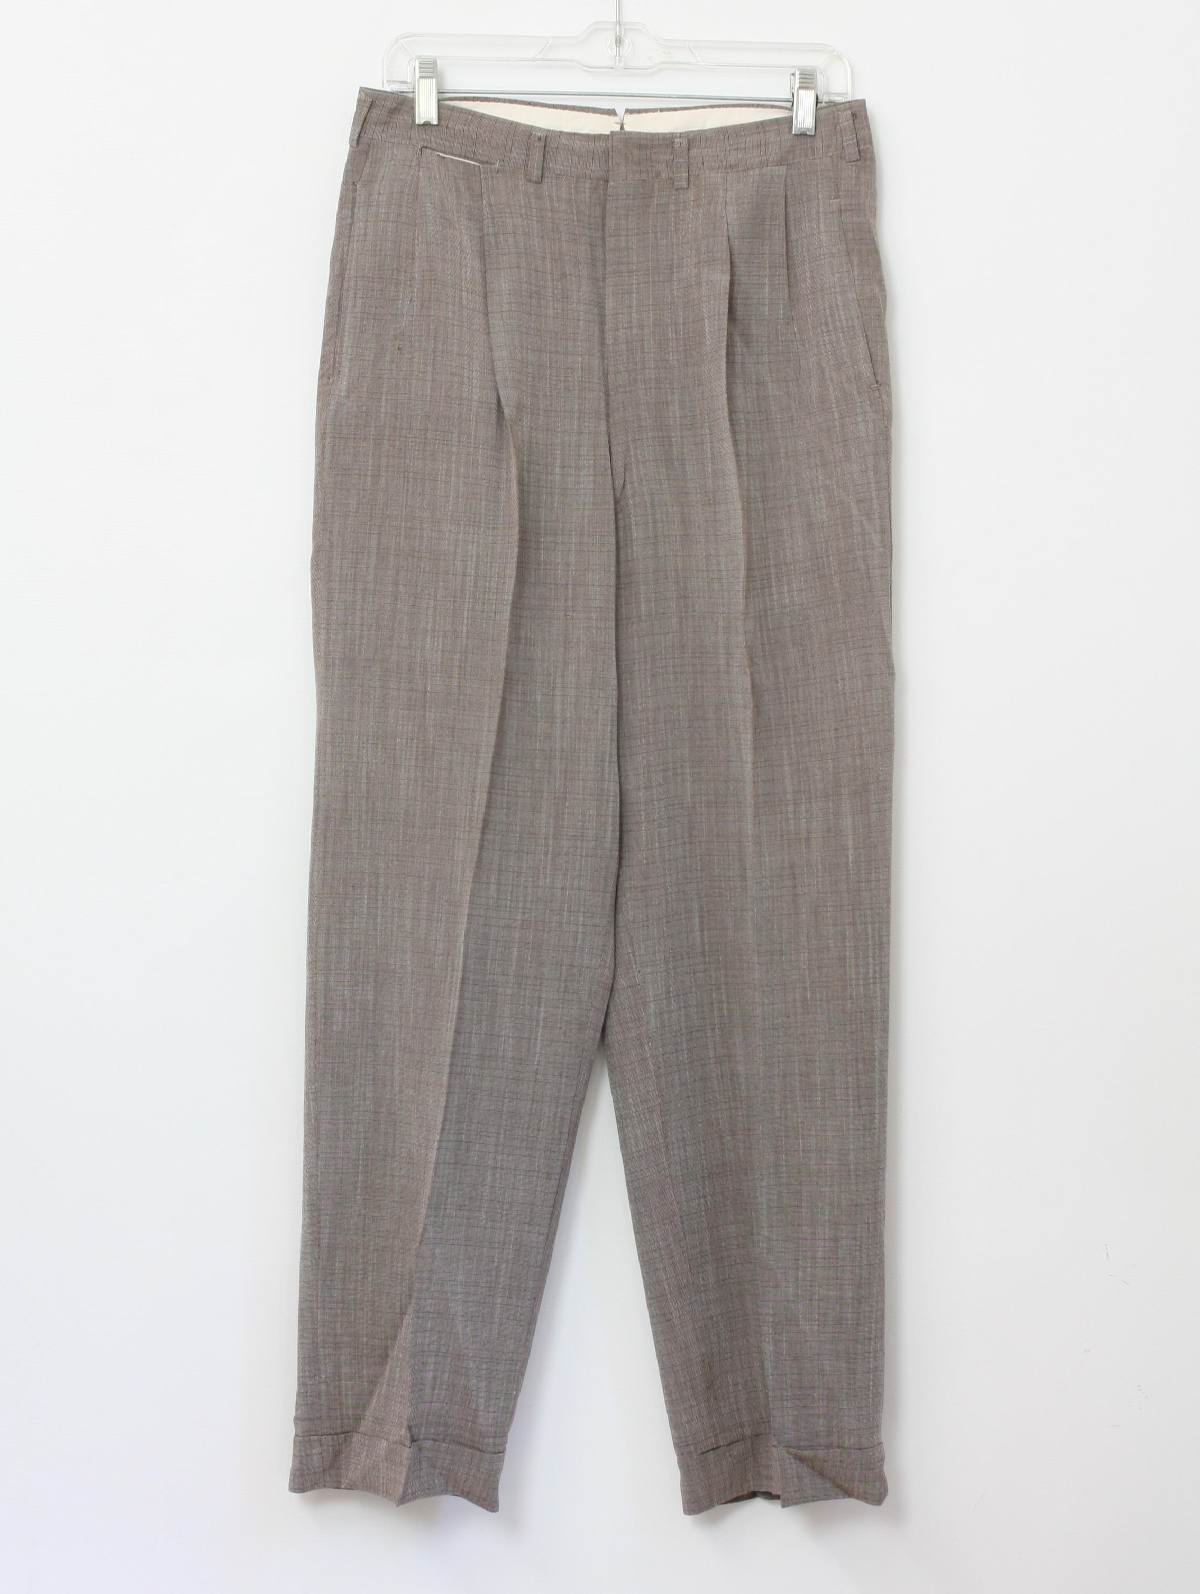 Vintage Dry Clean Only 1950s Pants: Late 50s -Dry Clean Only- Mens ...